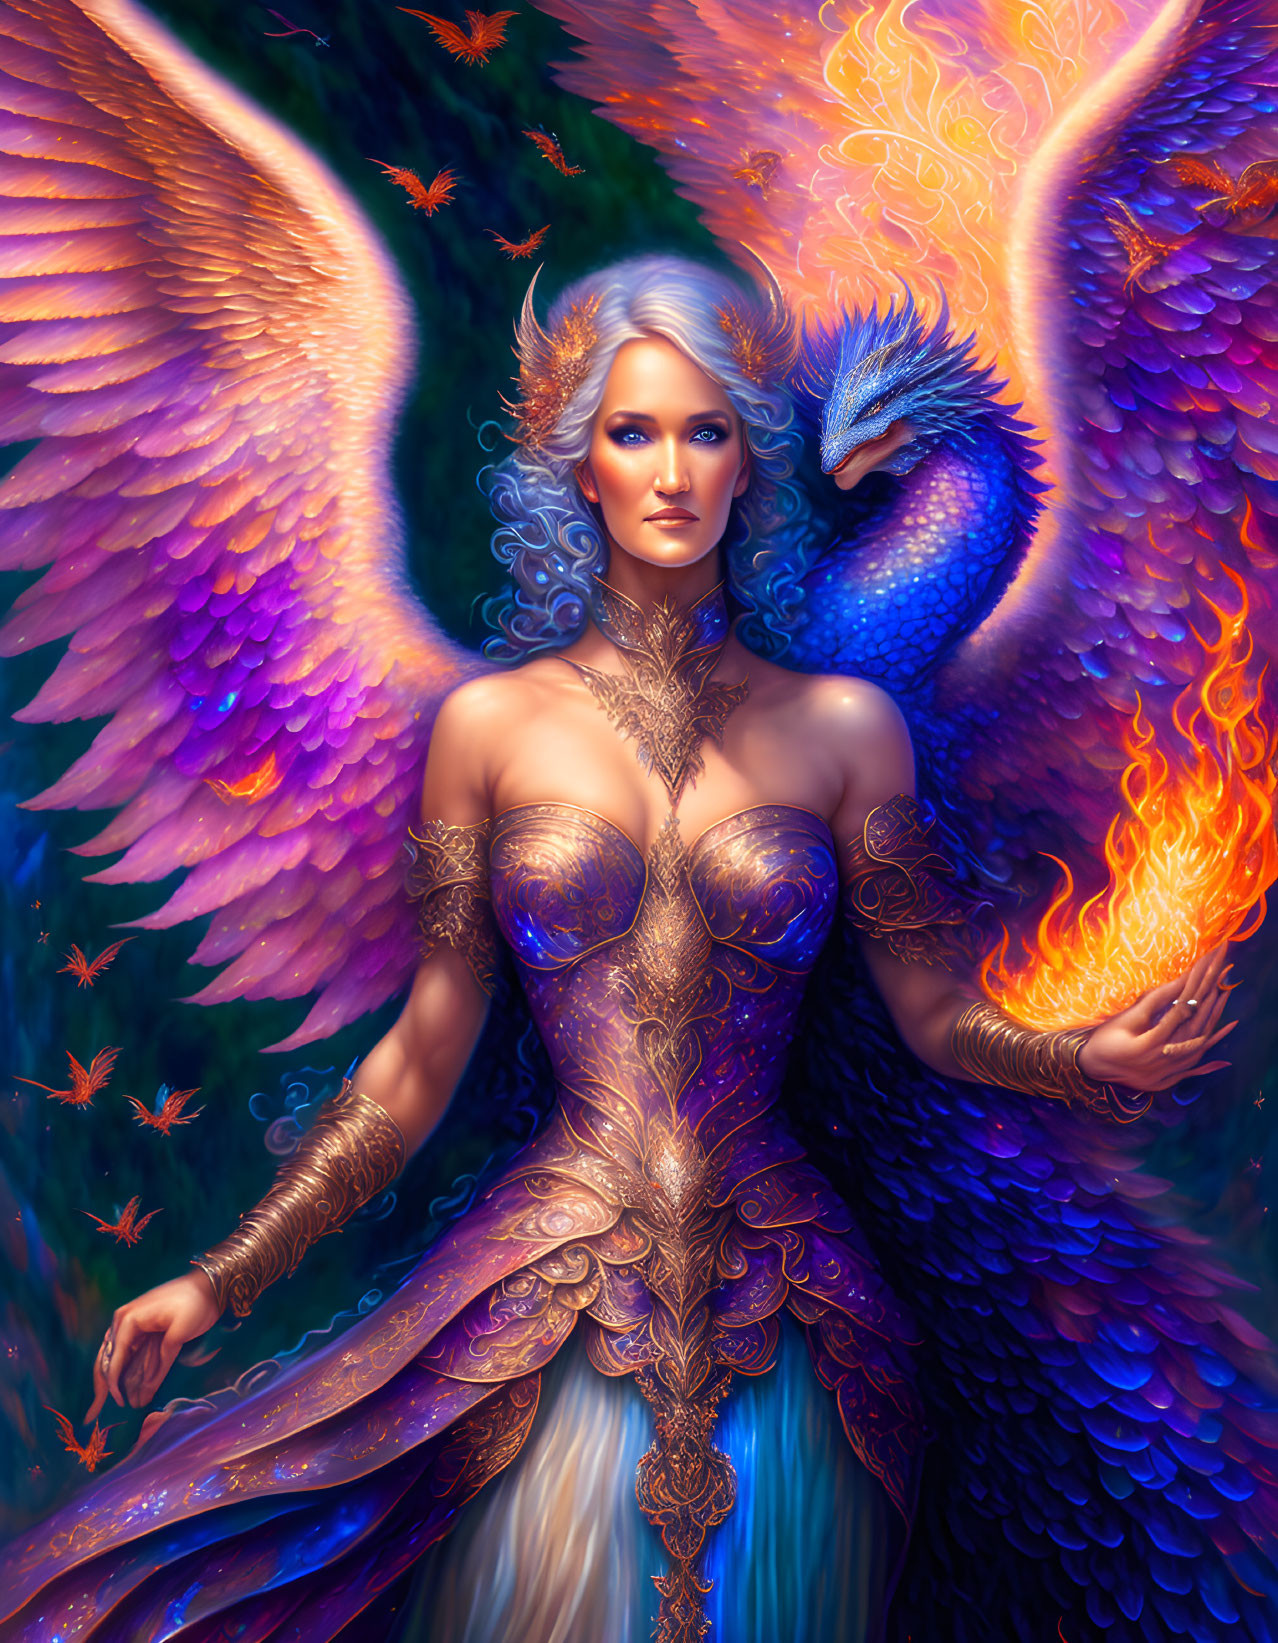 Ethereal woman with angelic wings holding a phoenix and flame in hand